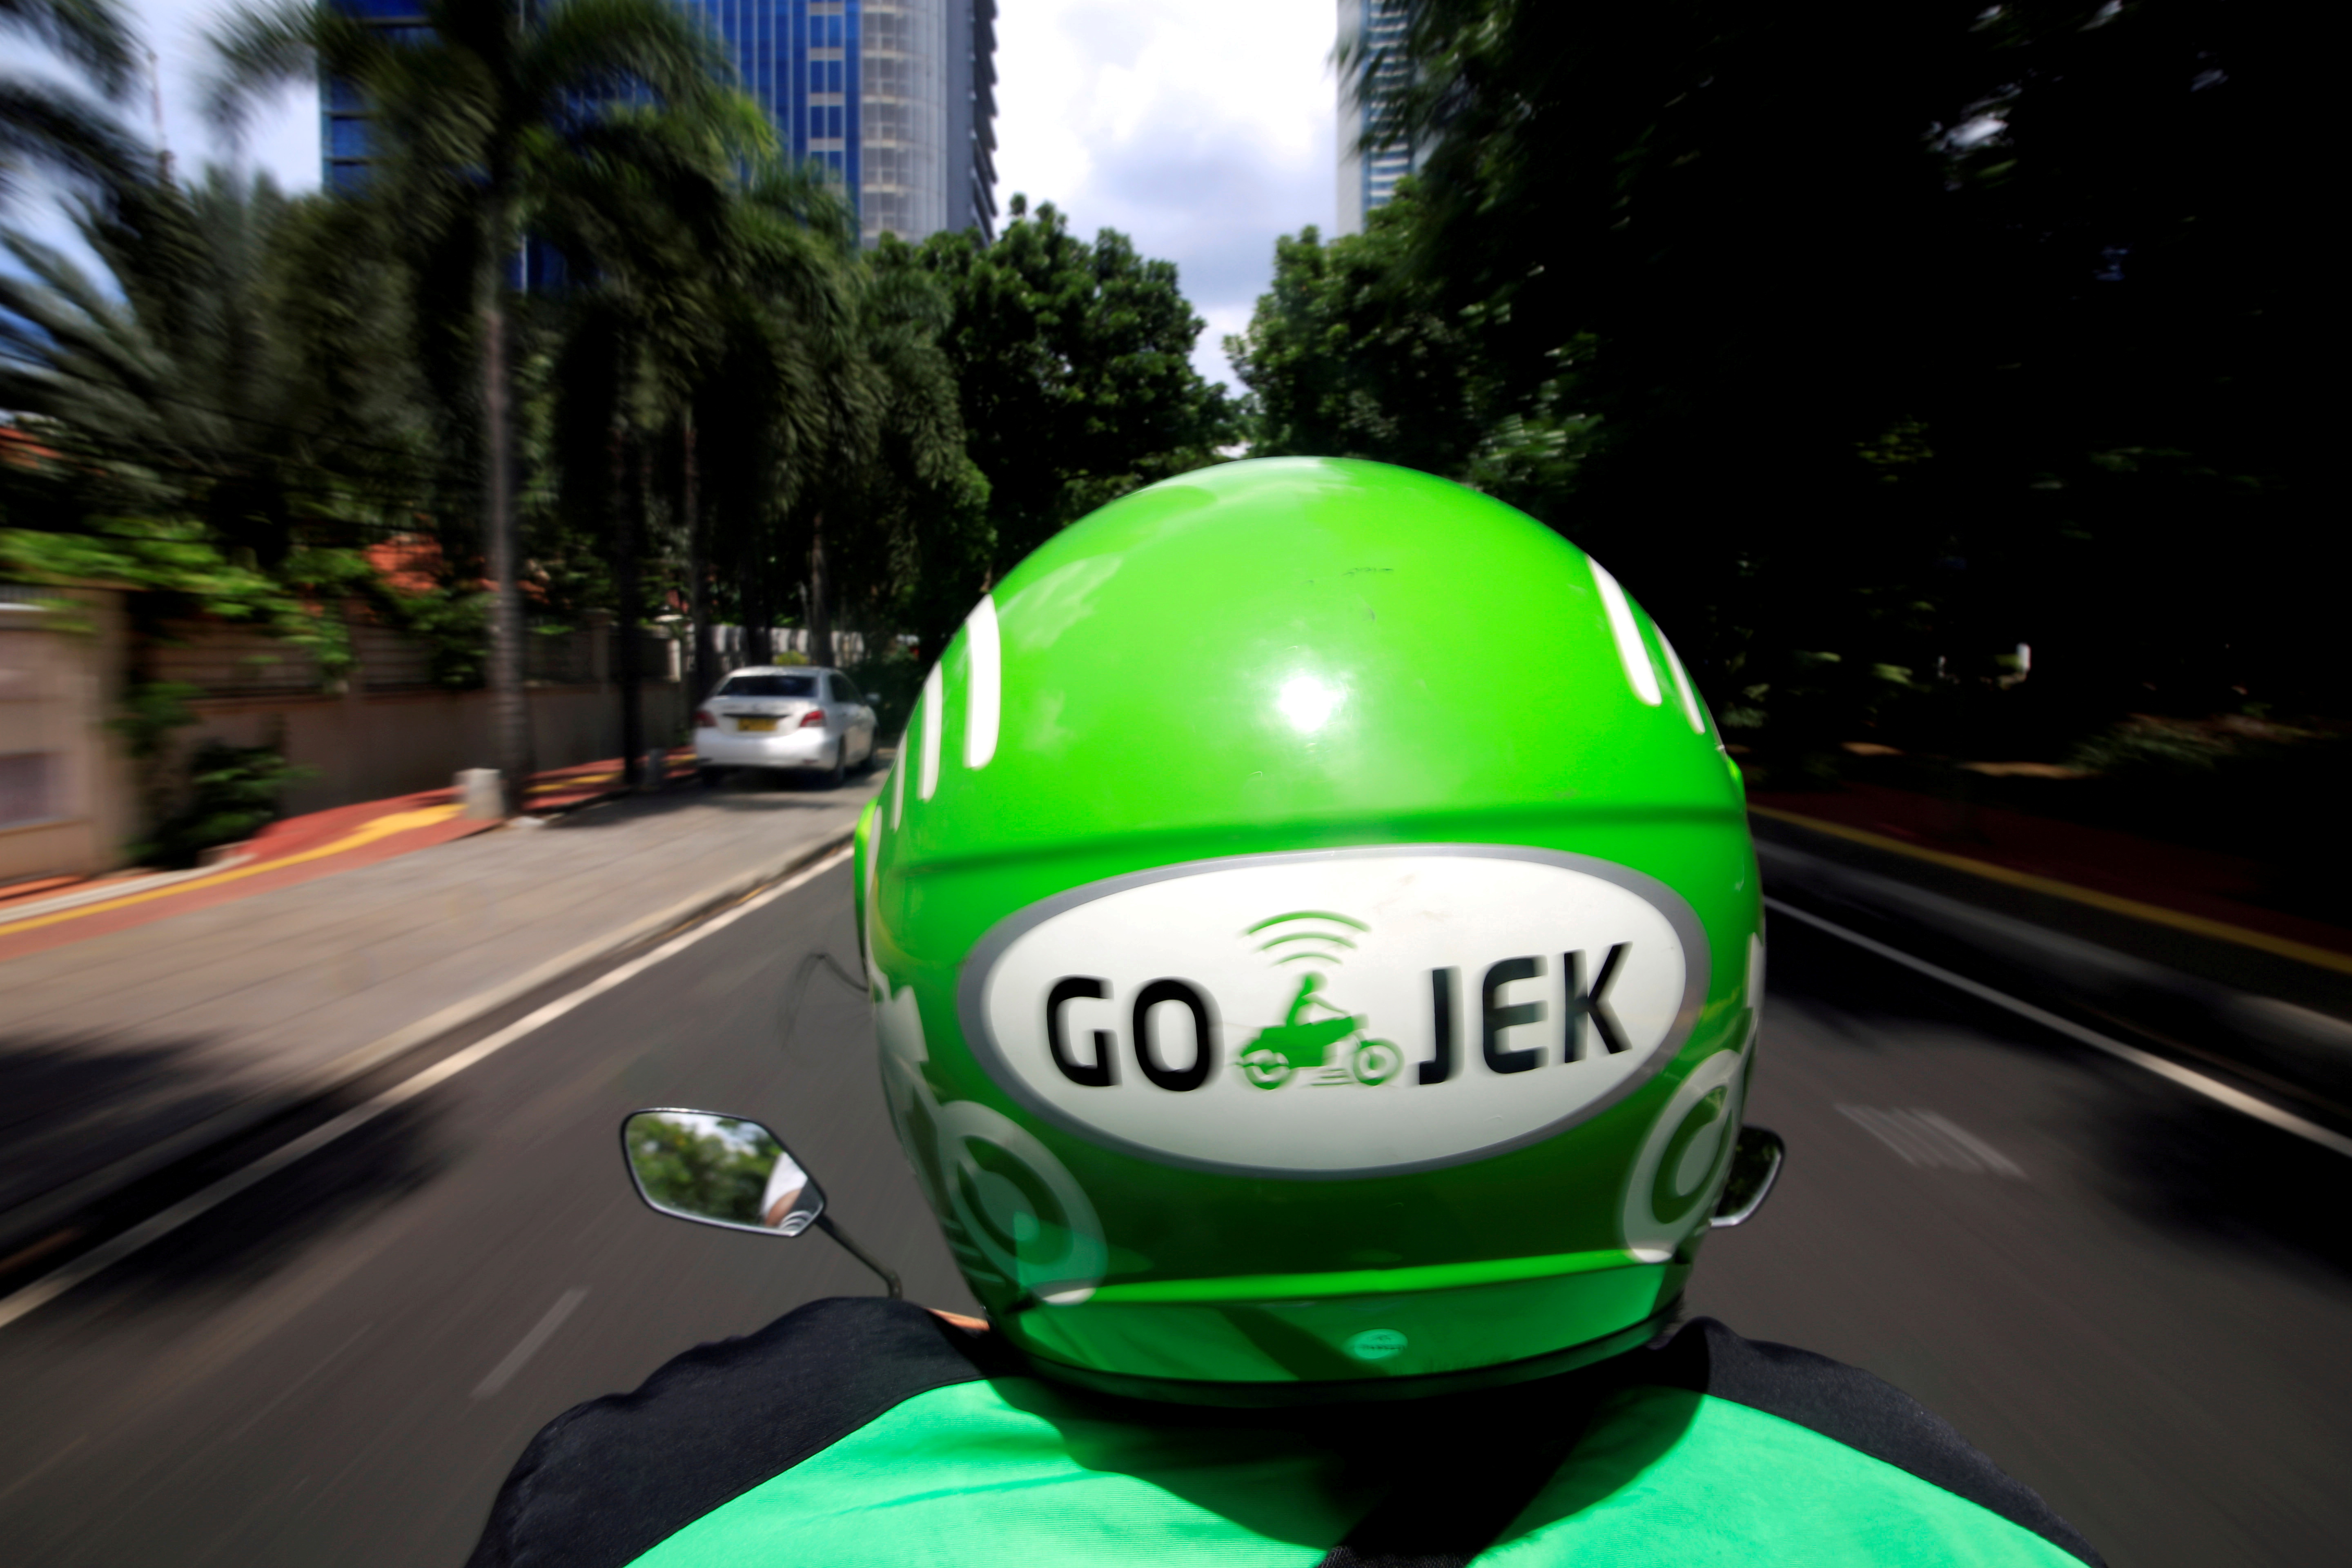 A Go-Jek driver rides a motorcycle on a street in Jakarta, Indonesia